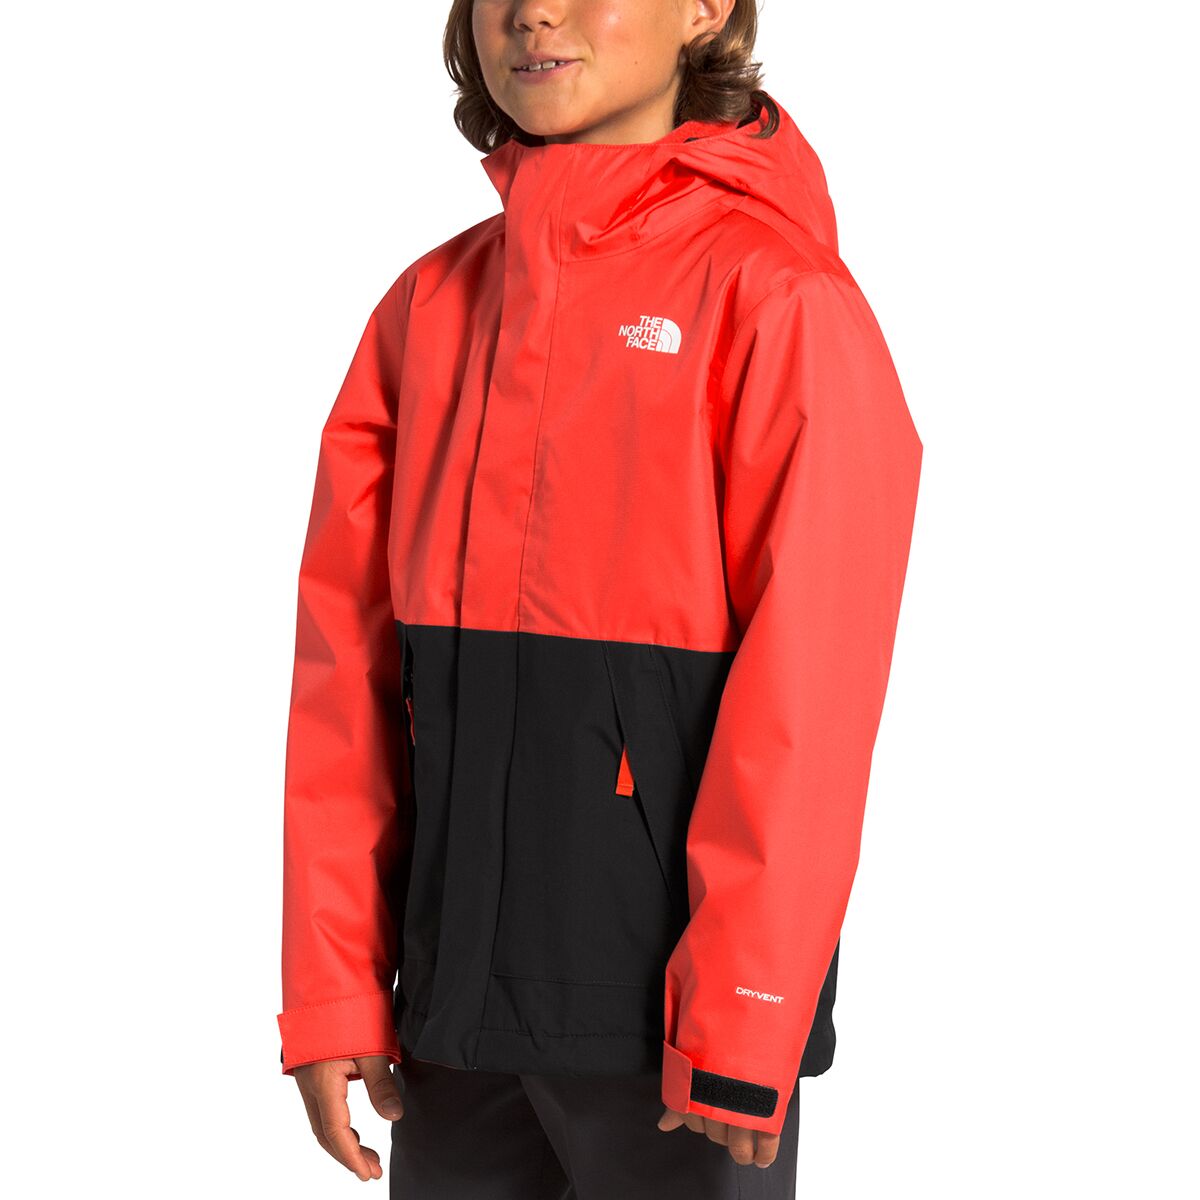 red north face jacket boys